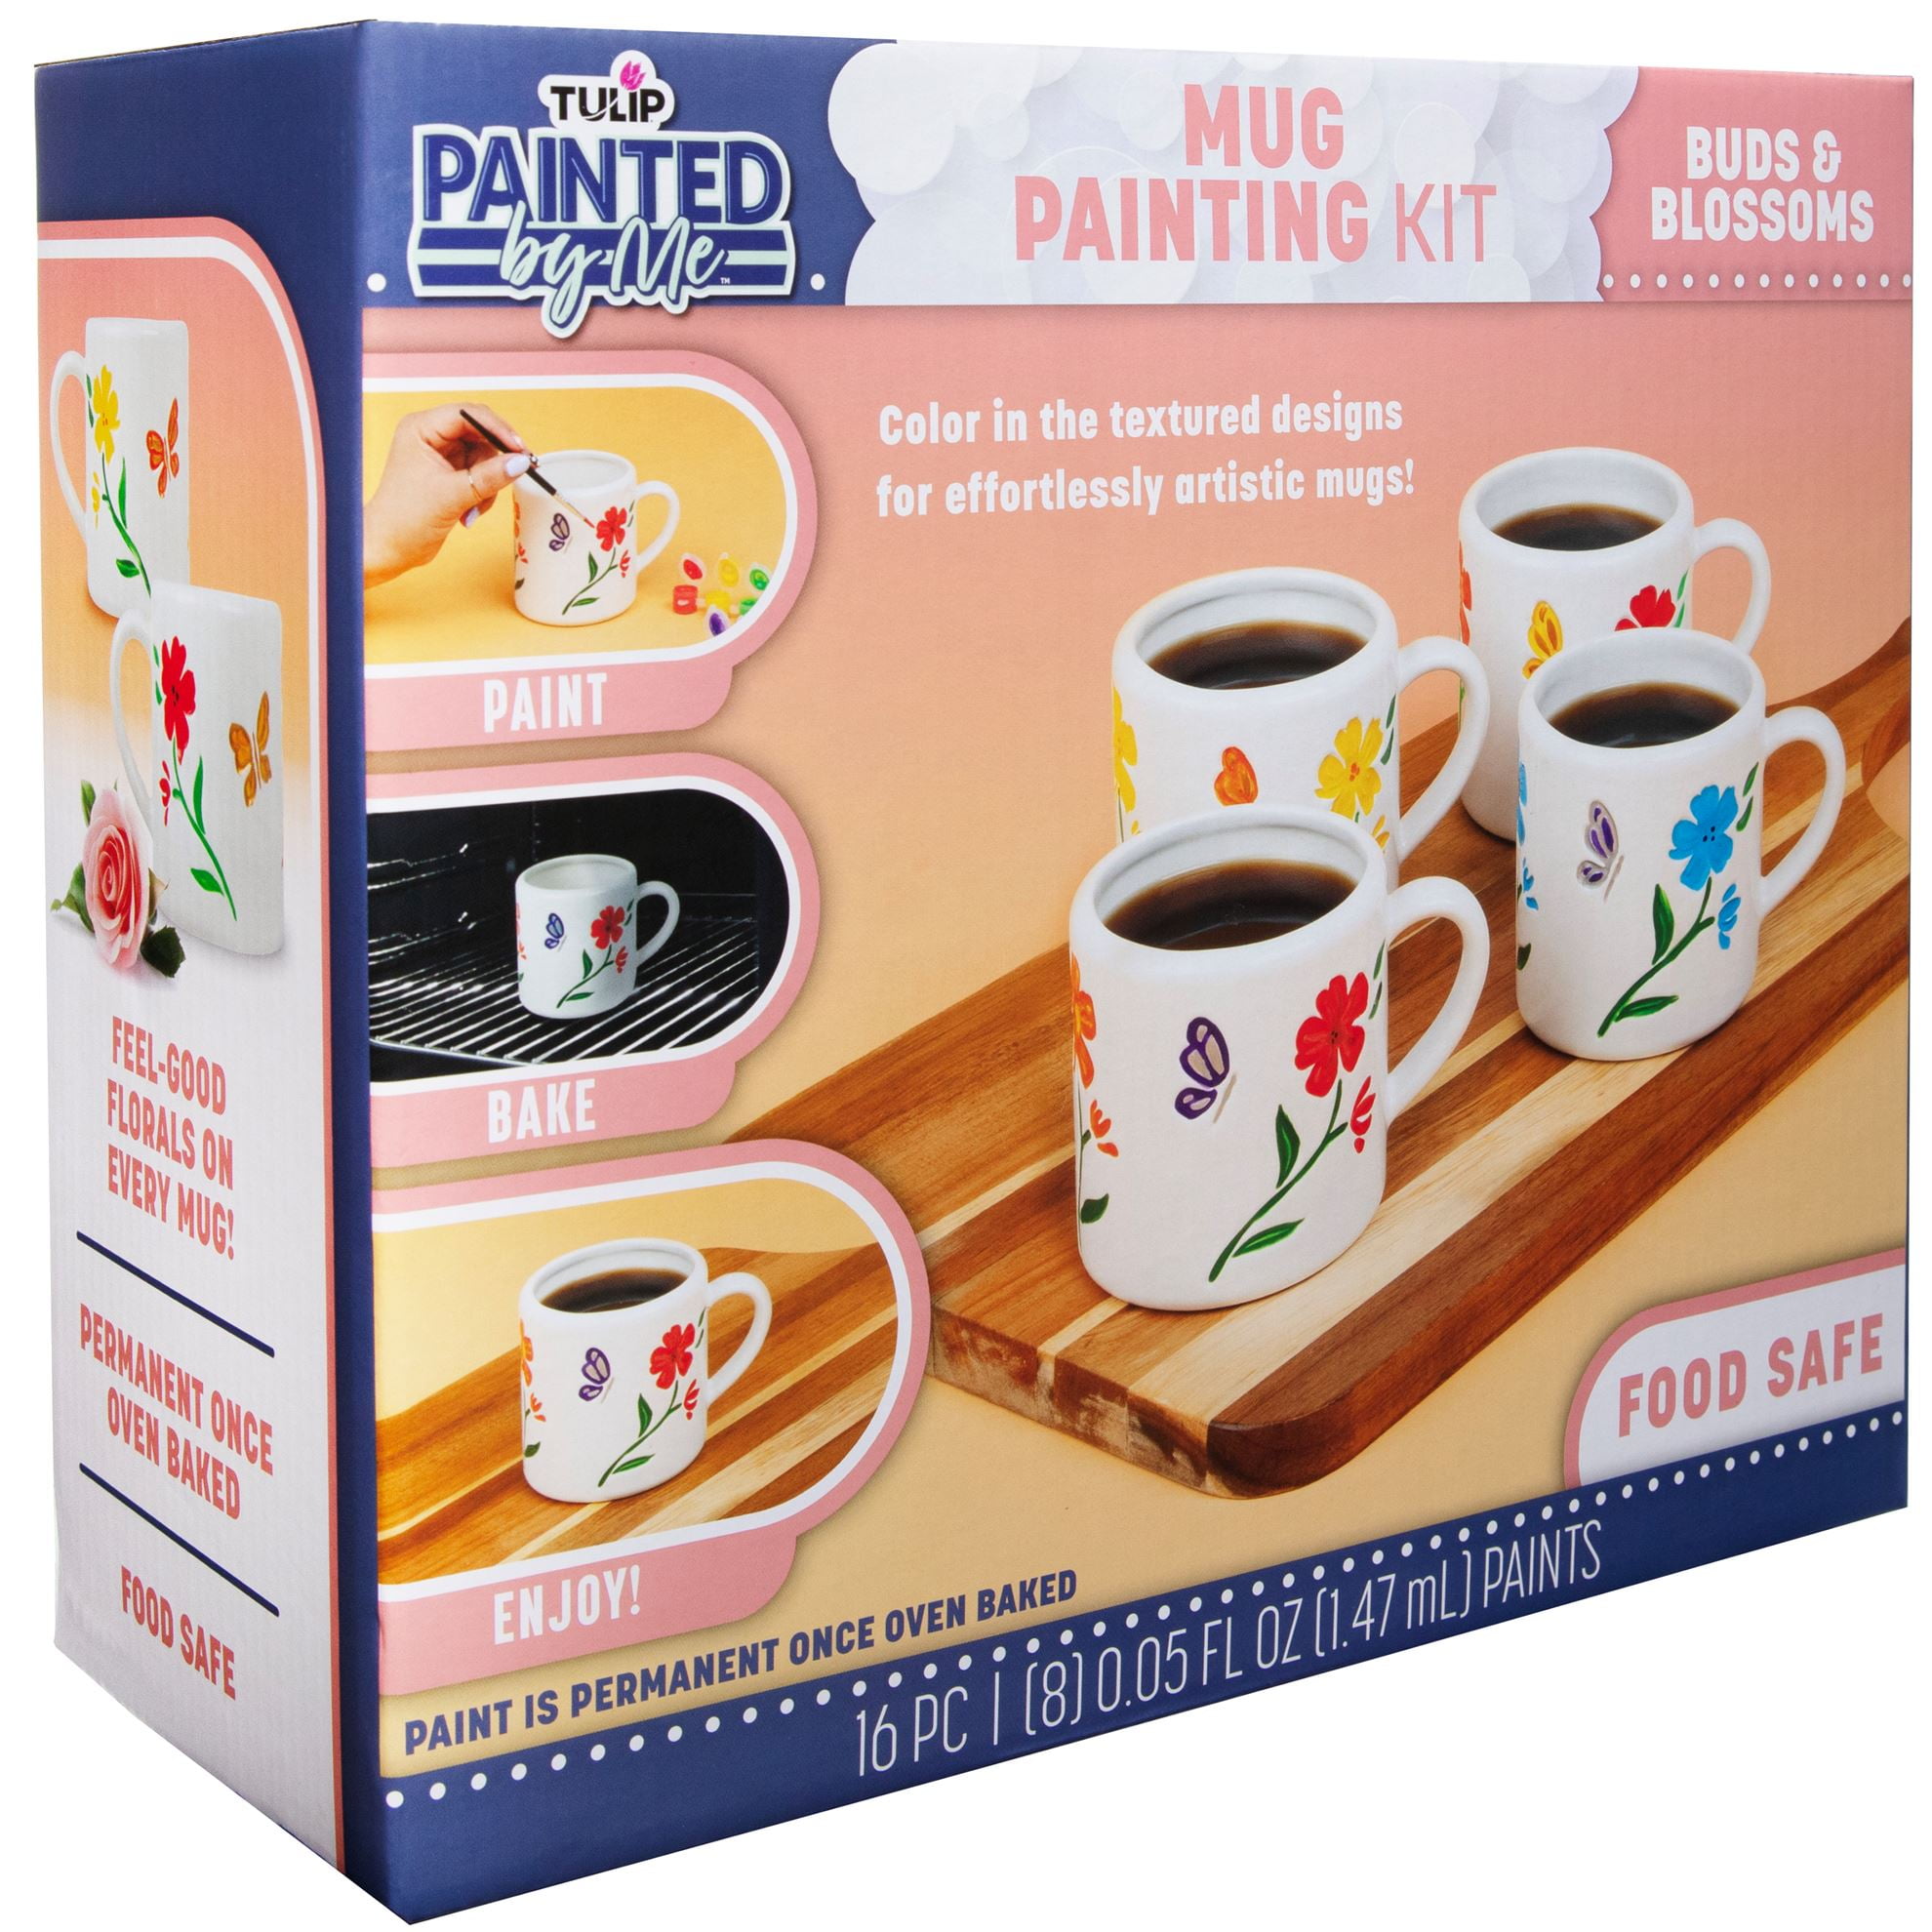 TULIP Painted by Me All-in-One Paint and Bake Ceramic 4 Mug Set with Flower  Designs, Easy Craft Kit, Includes 4 Mugs, 8 Rainbow Paints, 4 Brushes,  Ceramic Studio Quality when oven baked